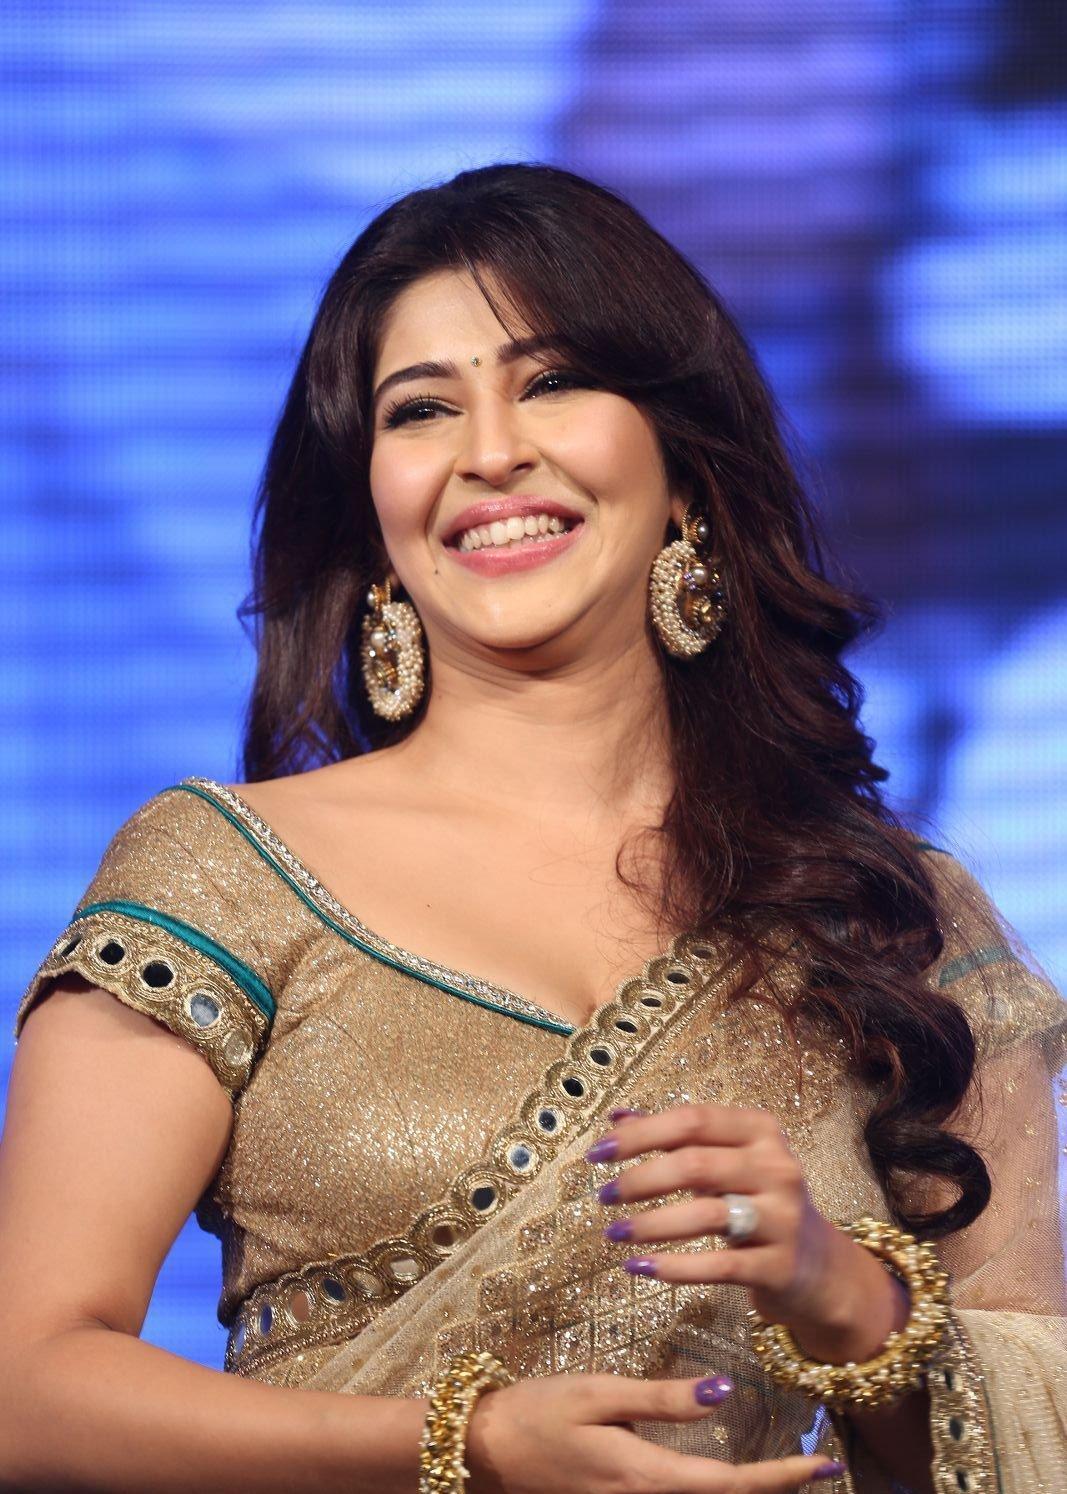 High Quality Bollywood Celebrity Pictures Sonarika Bhadoria Looks Super Sexy In Saree At Telugu